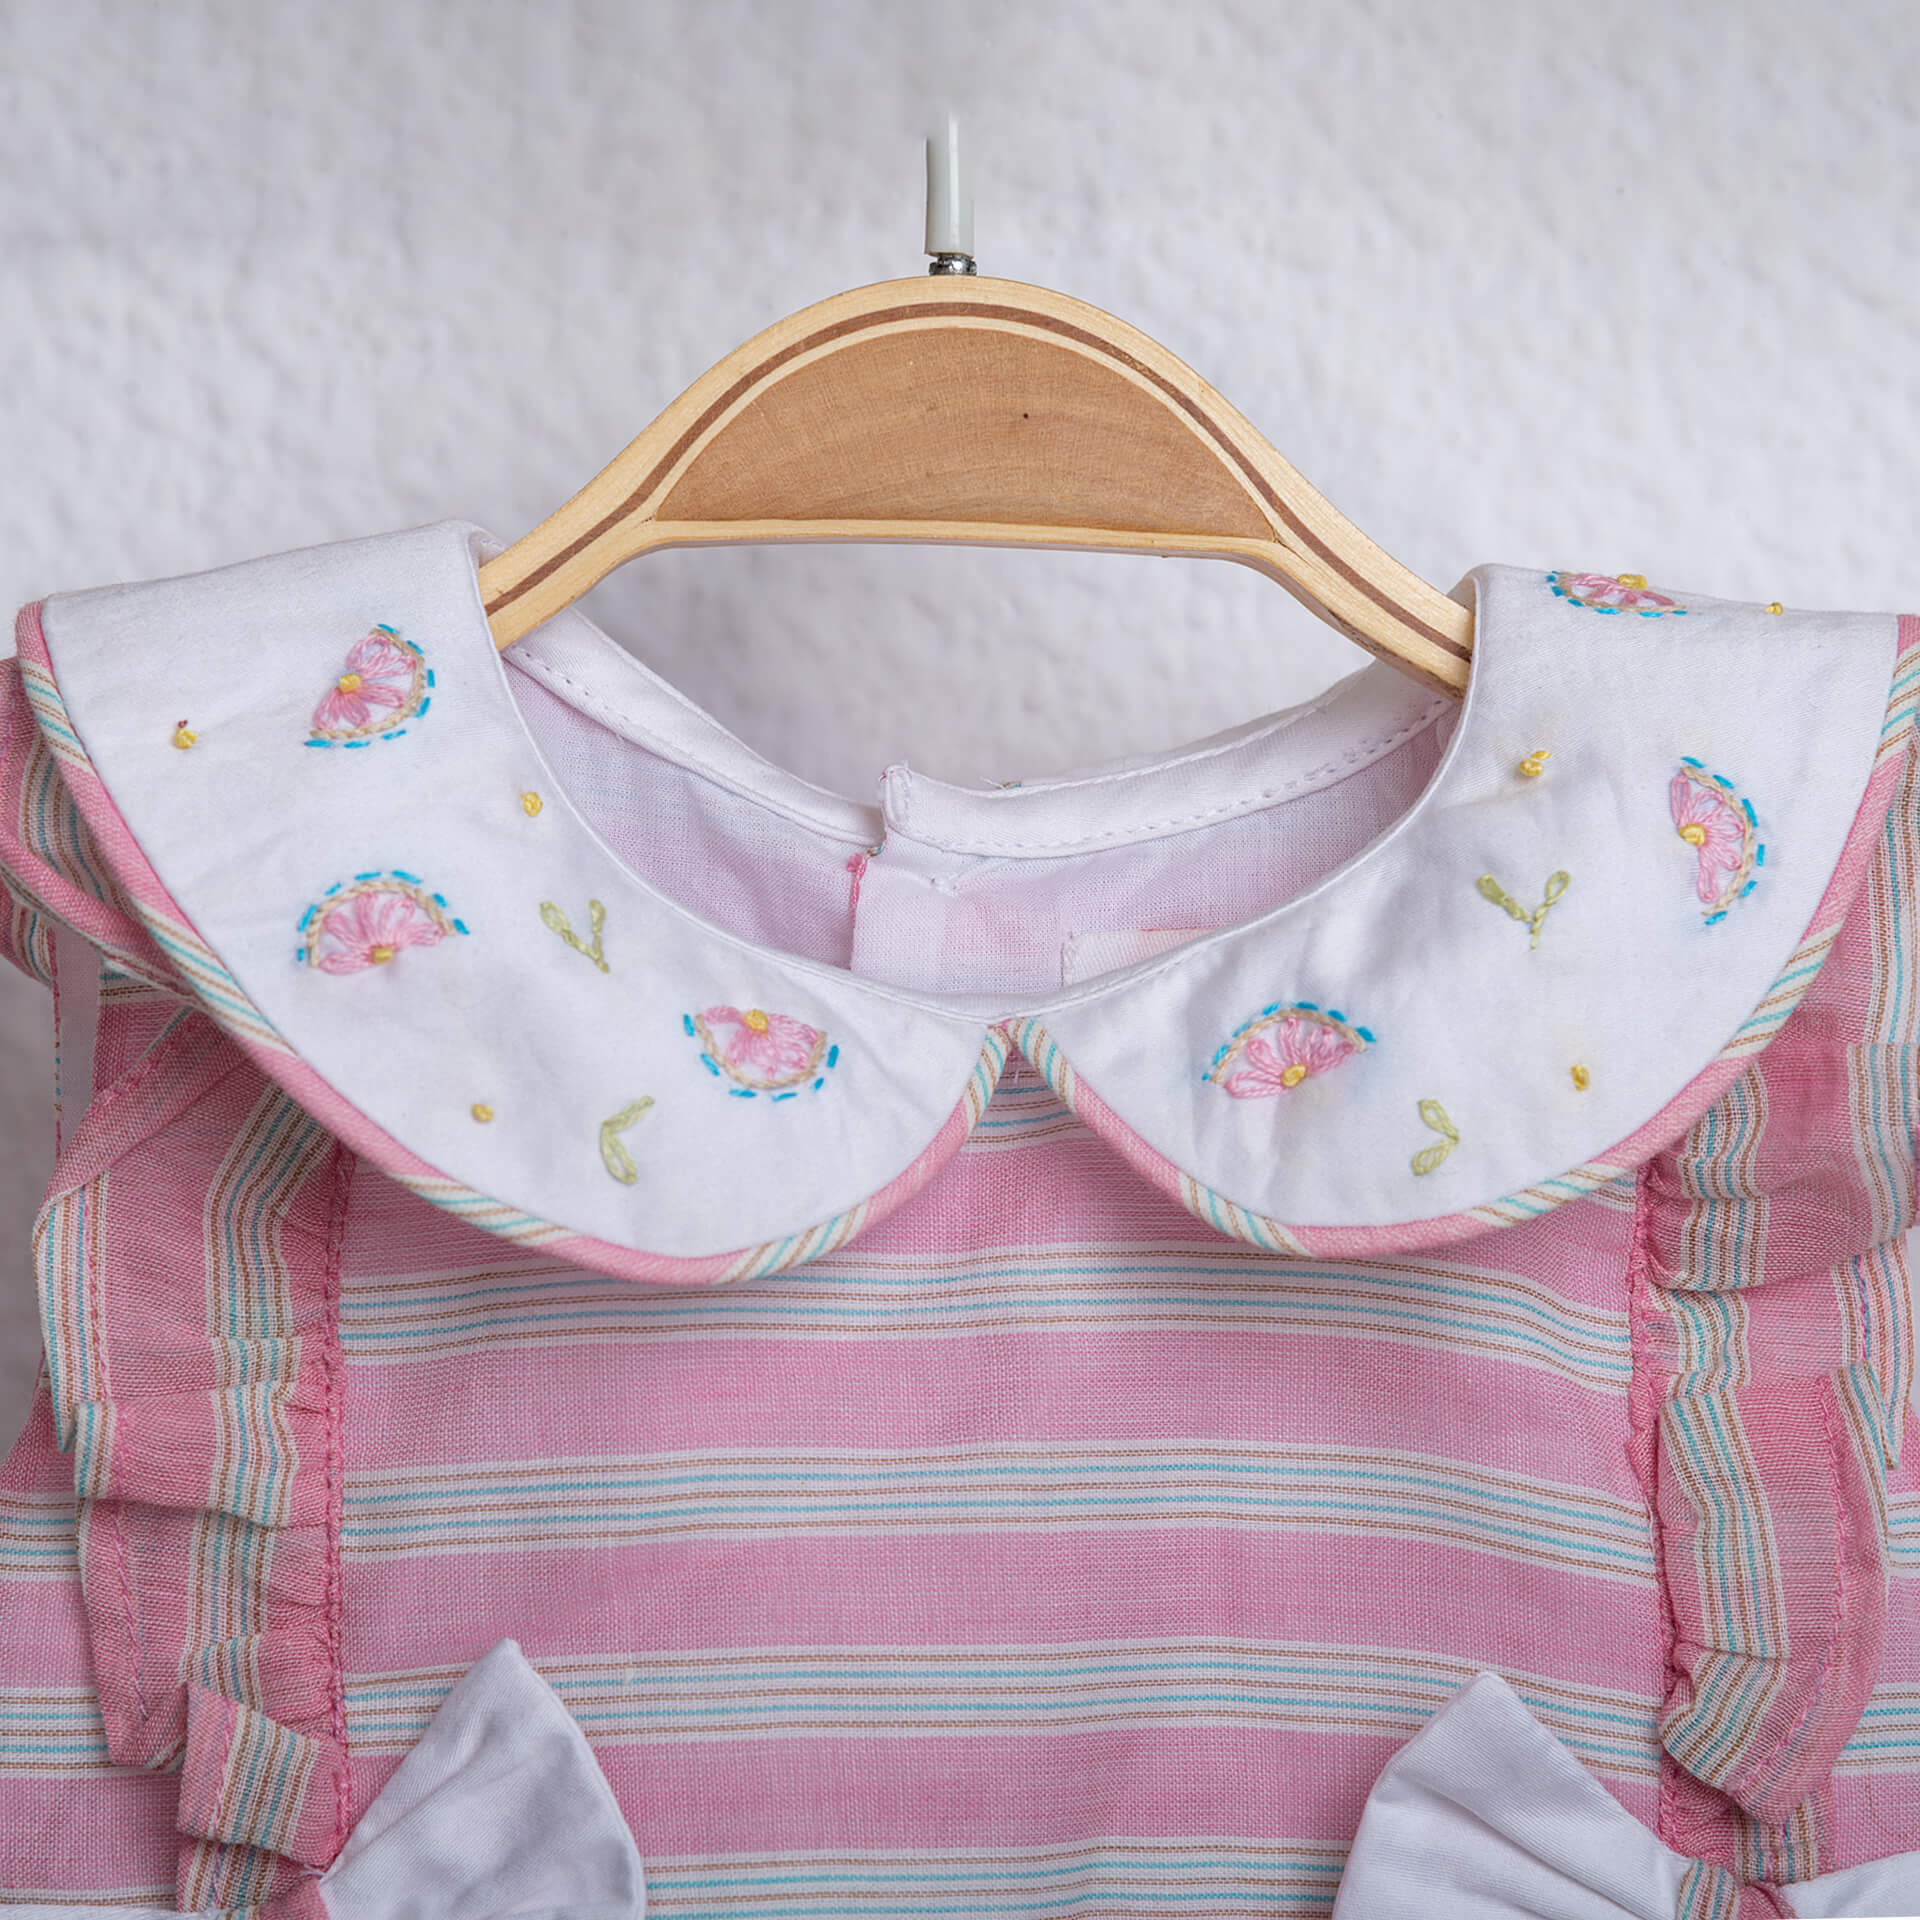 Close-up of hand embroidery detail on pink striped peter pan collared baby girl onesie from Soleilclo.